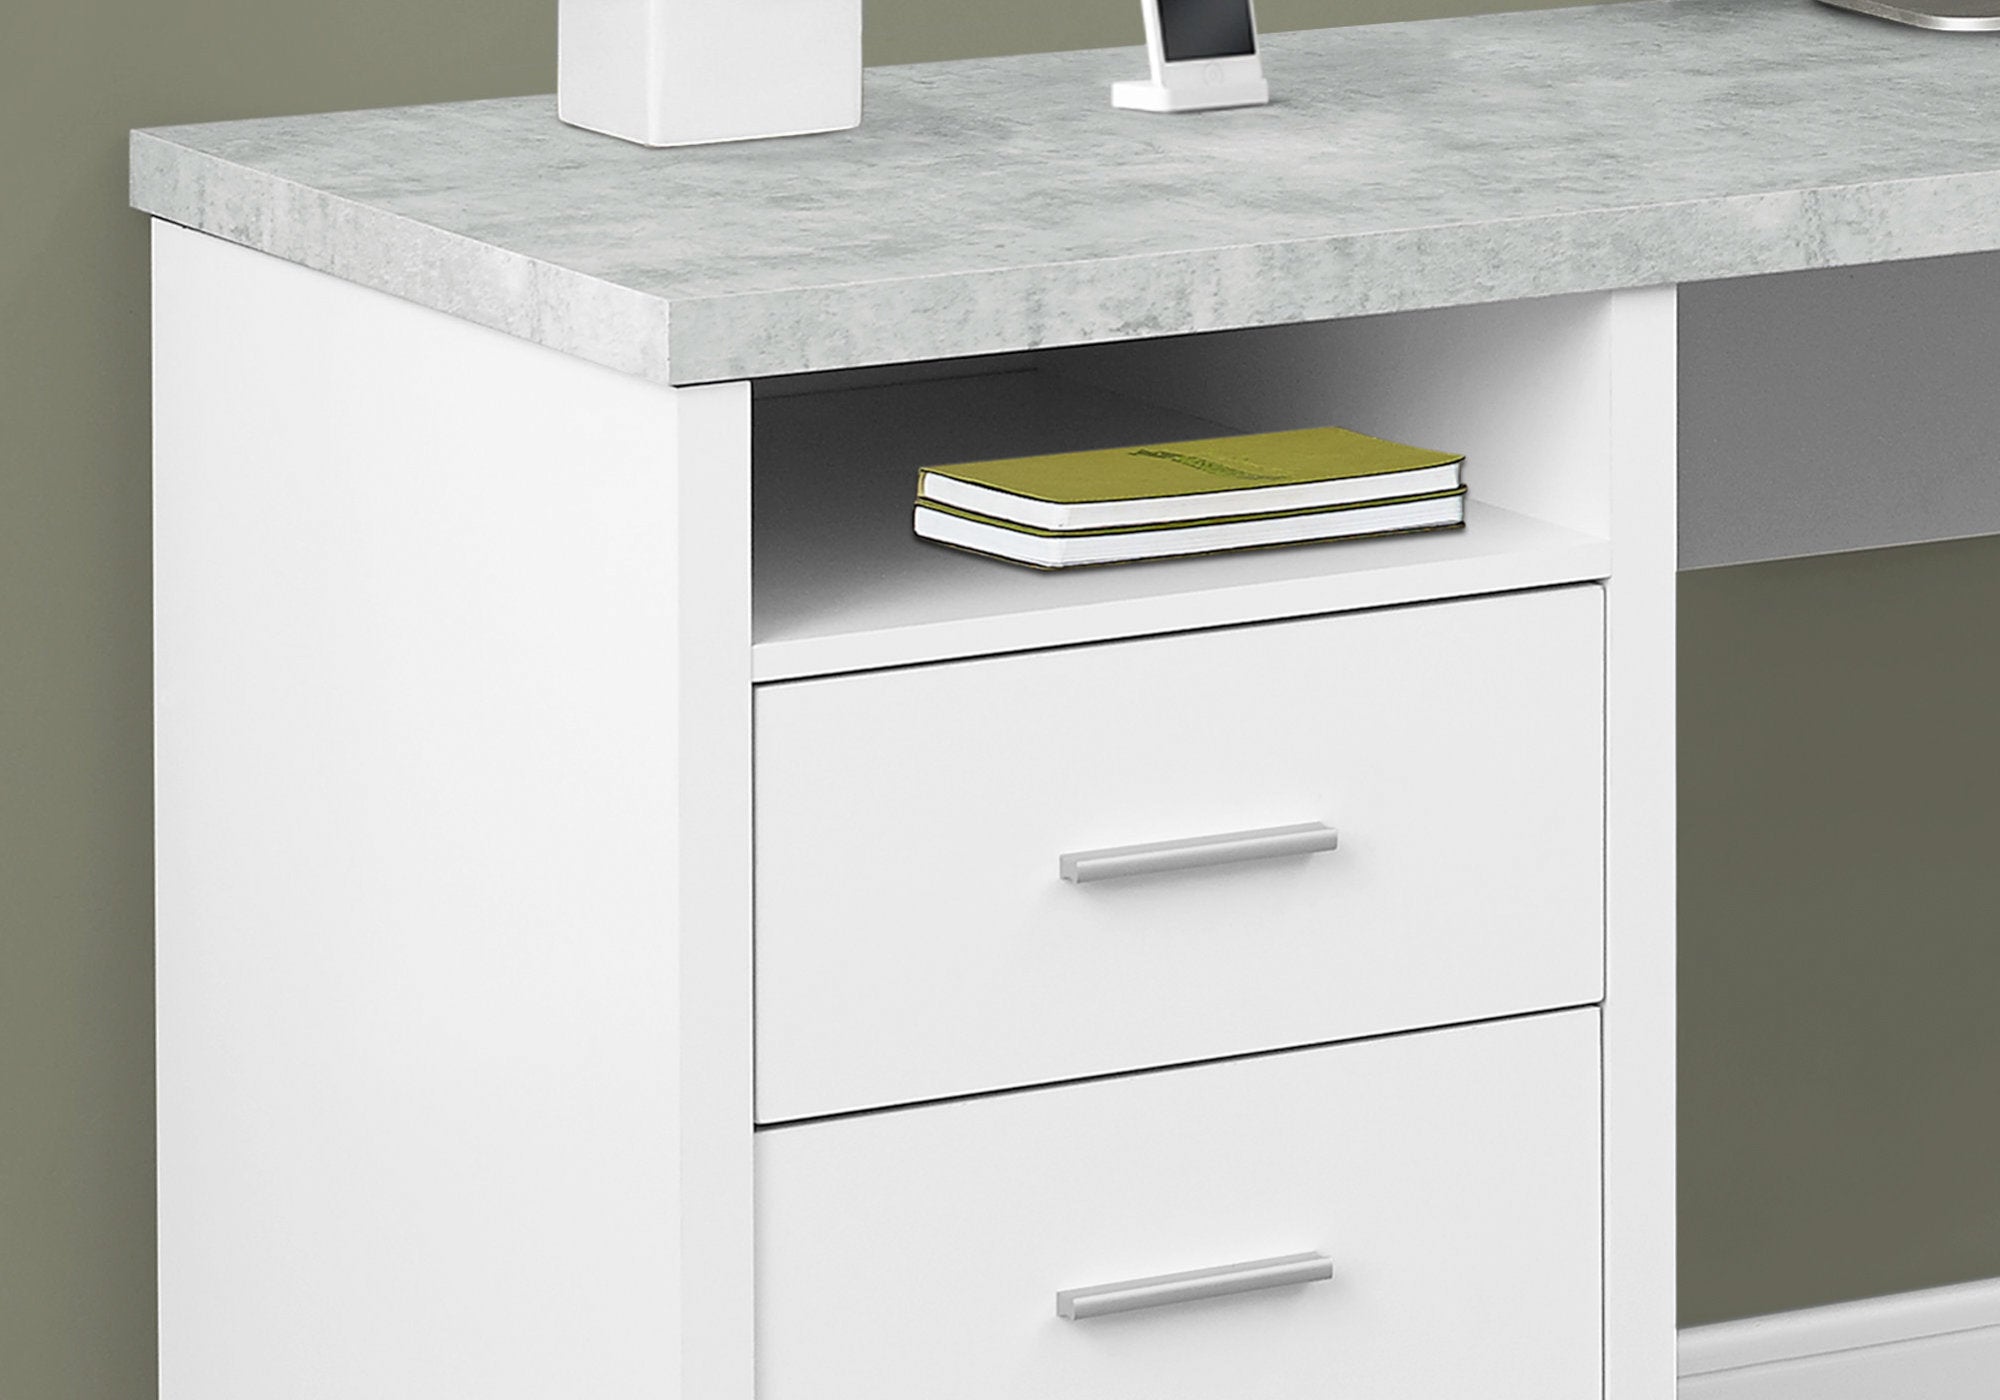 MN-727258    Computer Desk, Home Office, Corner, Left, Right Set-Up, Storage Drawers, 80"L, L Shape, Metal, Laminate, Grey Cement Look, Grey, Contemporary, Modern